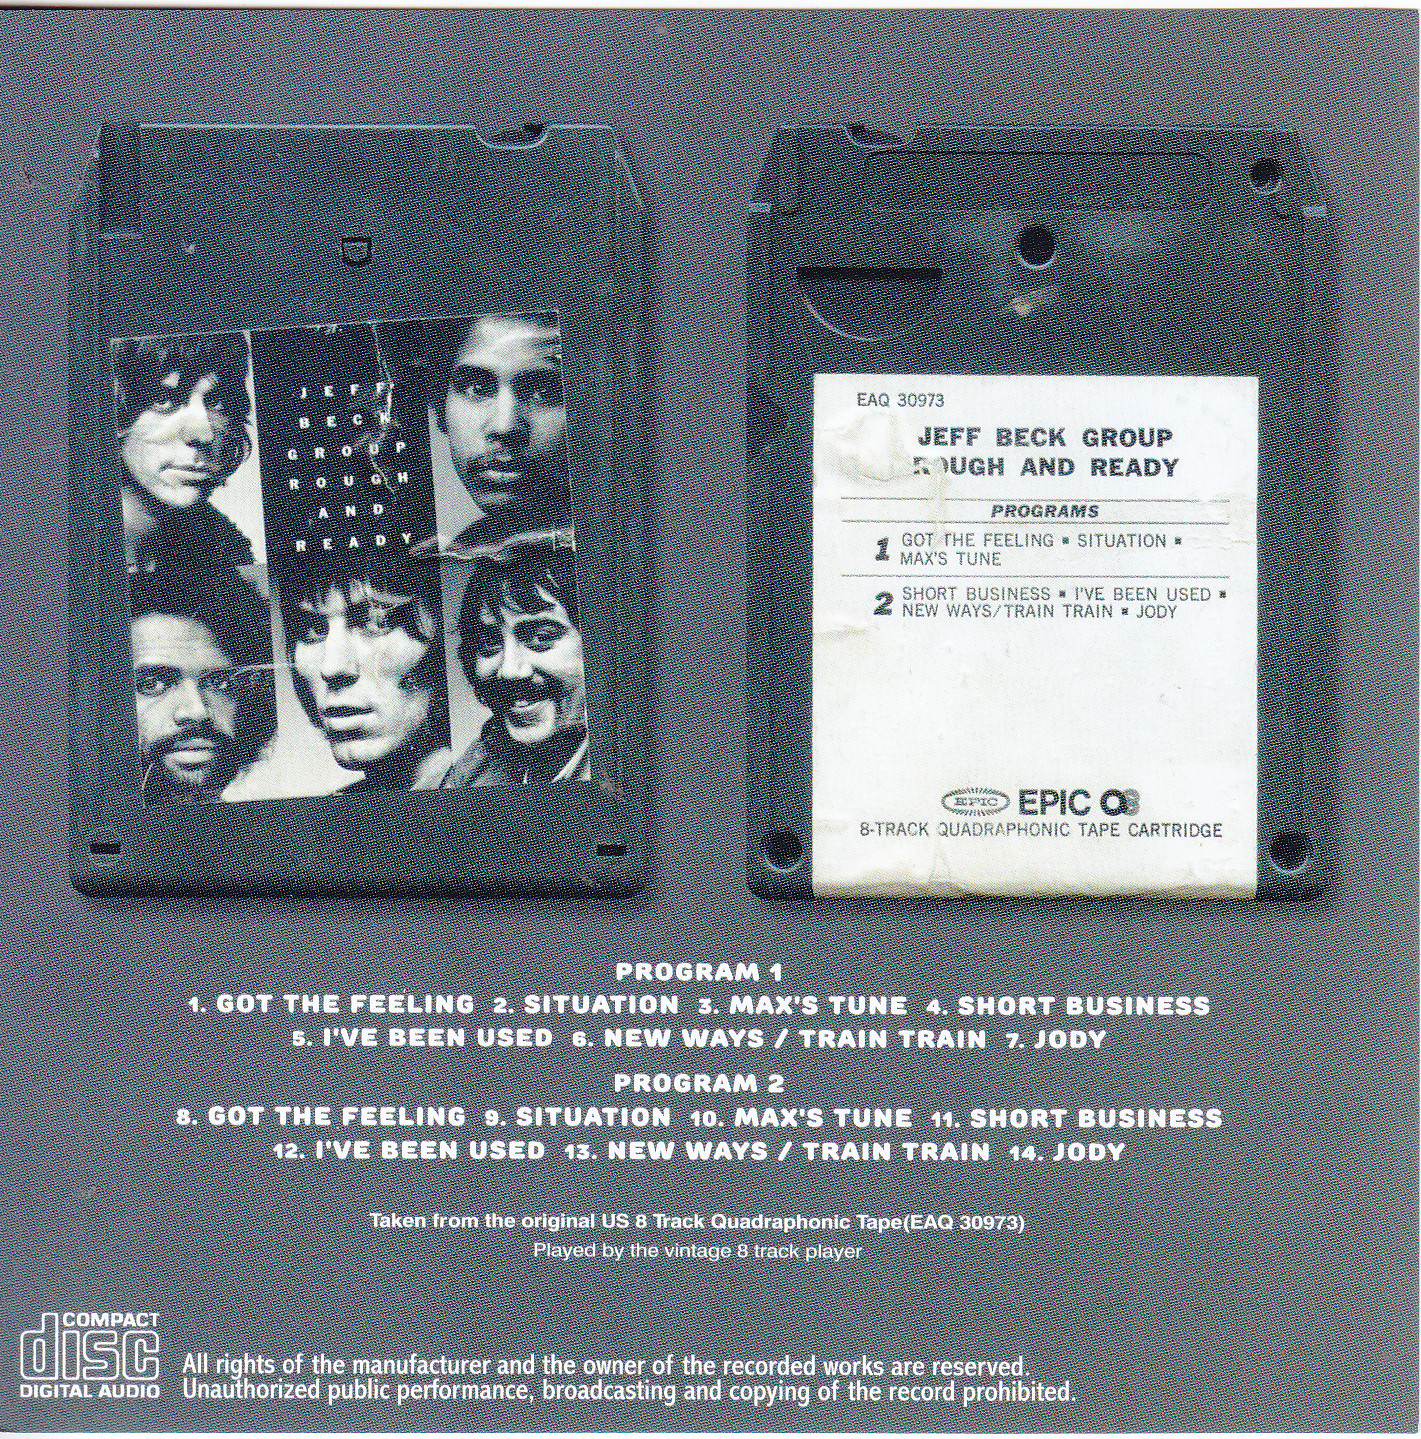 Jeff Beck Group / Rough And Ready Quadraphonic 8 Track Tape / 1CD